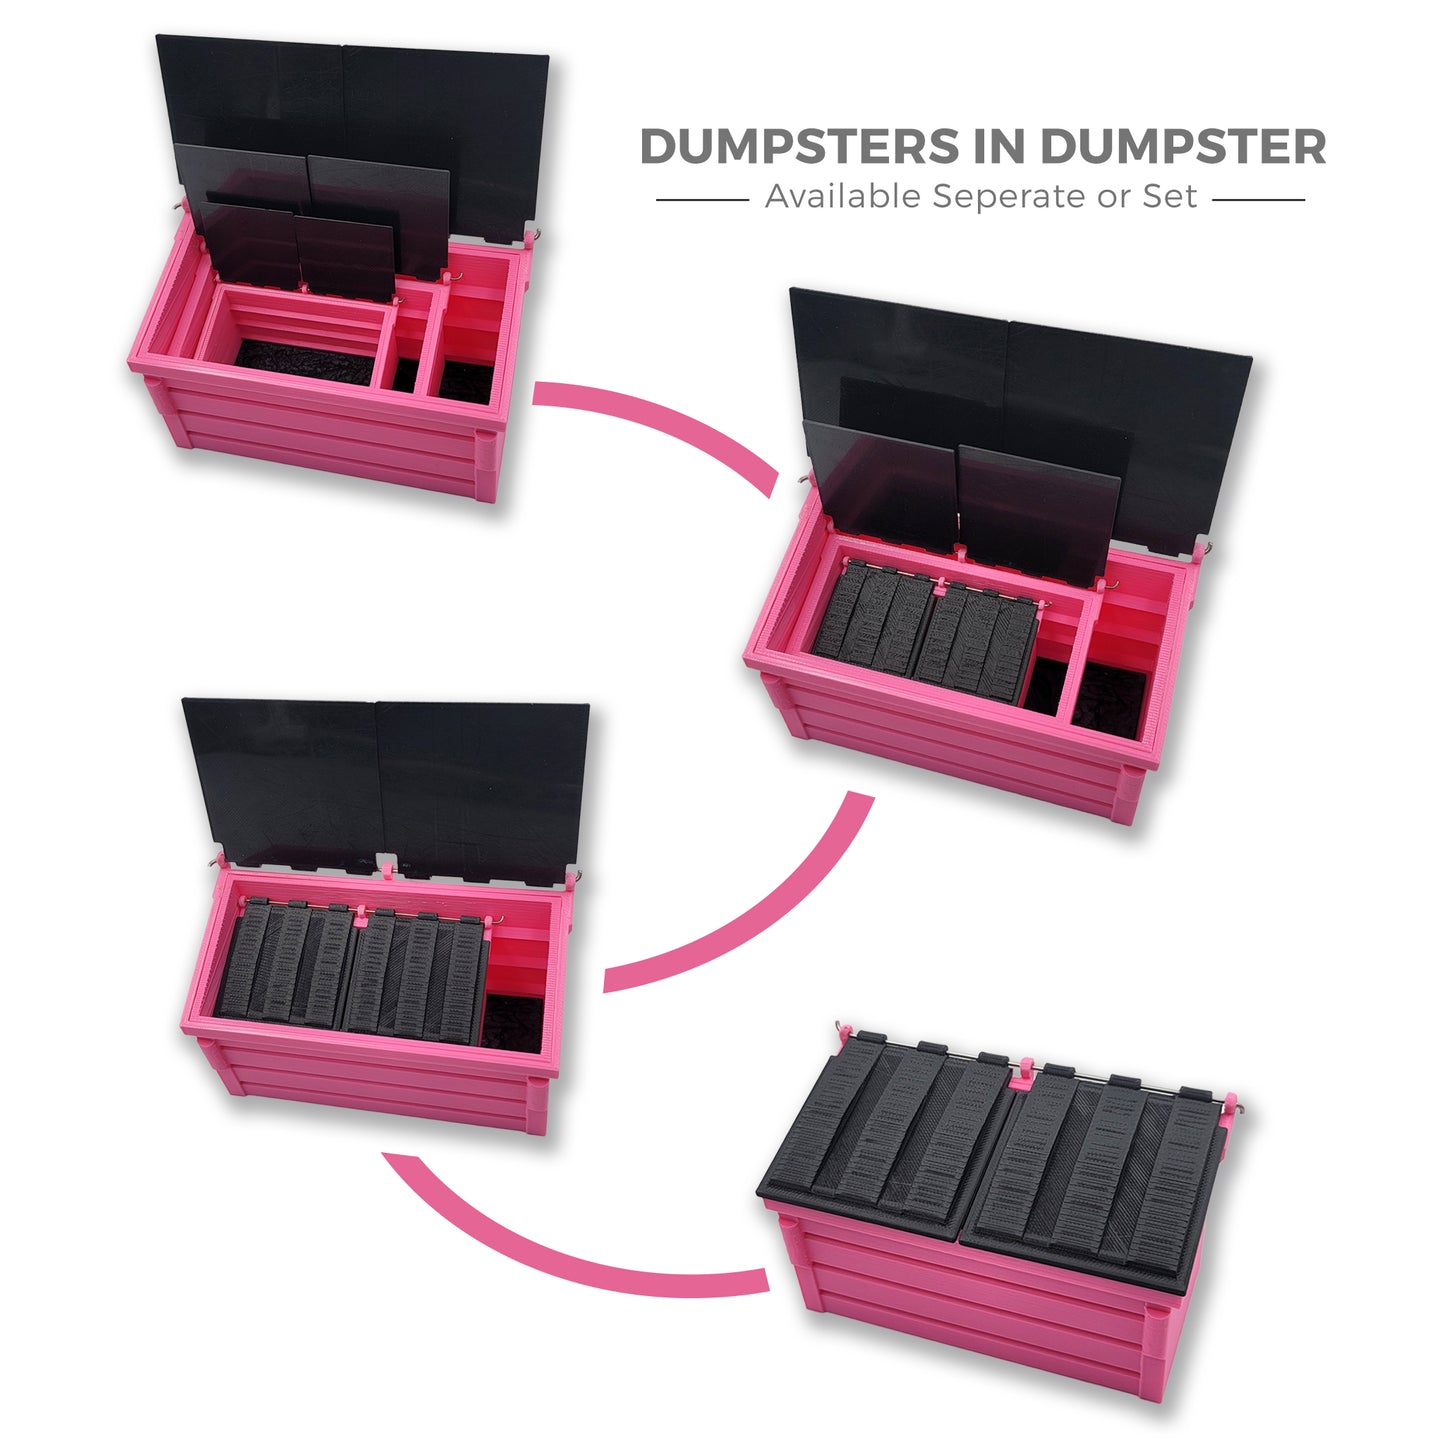 DUMPSTERS - Mini Dumpsters In Dumpster | Individually or Set (3D PRINTED)